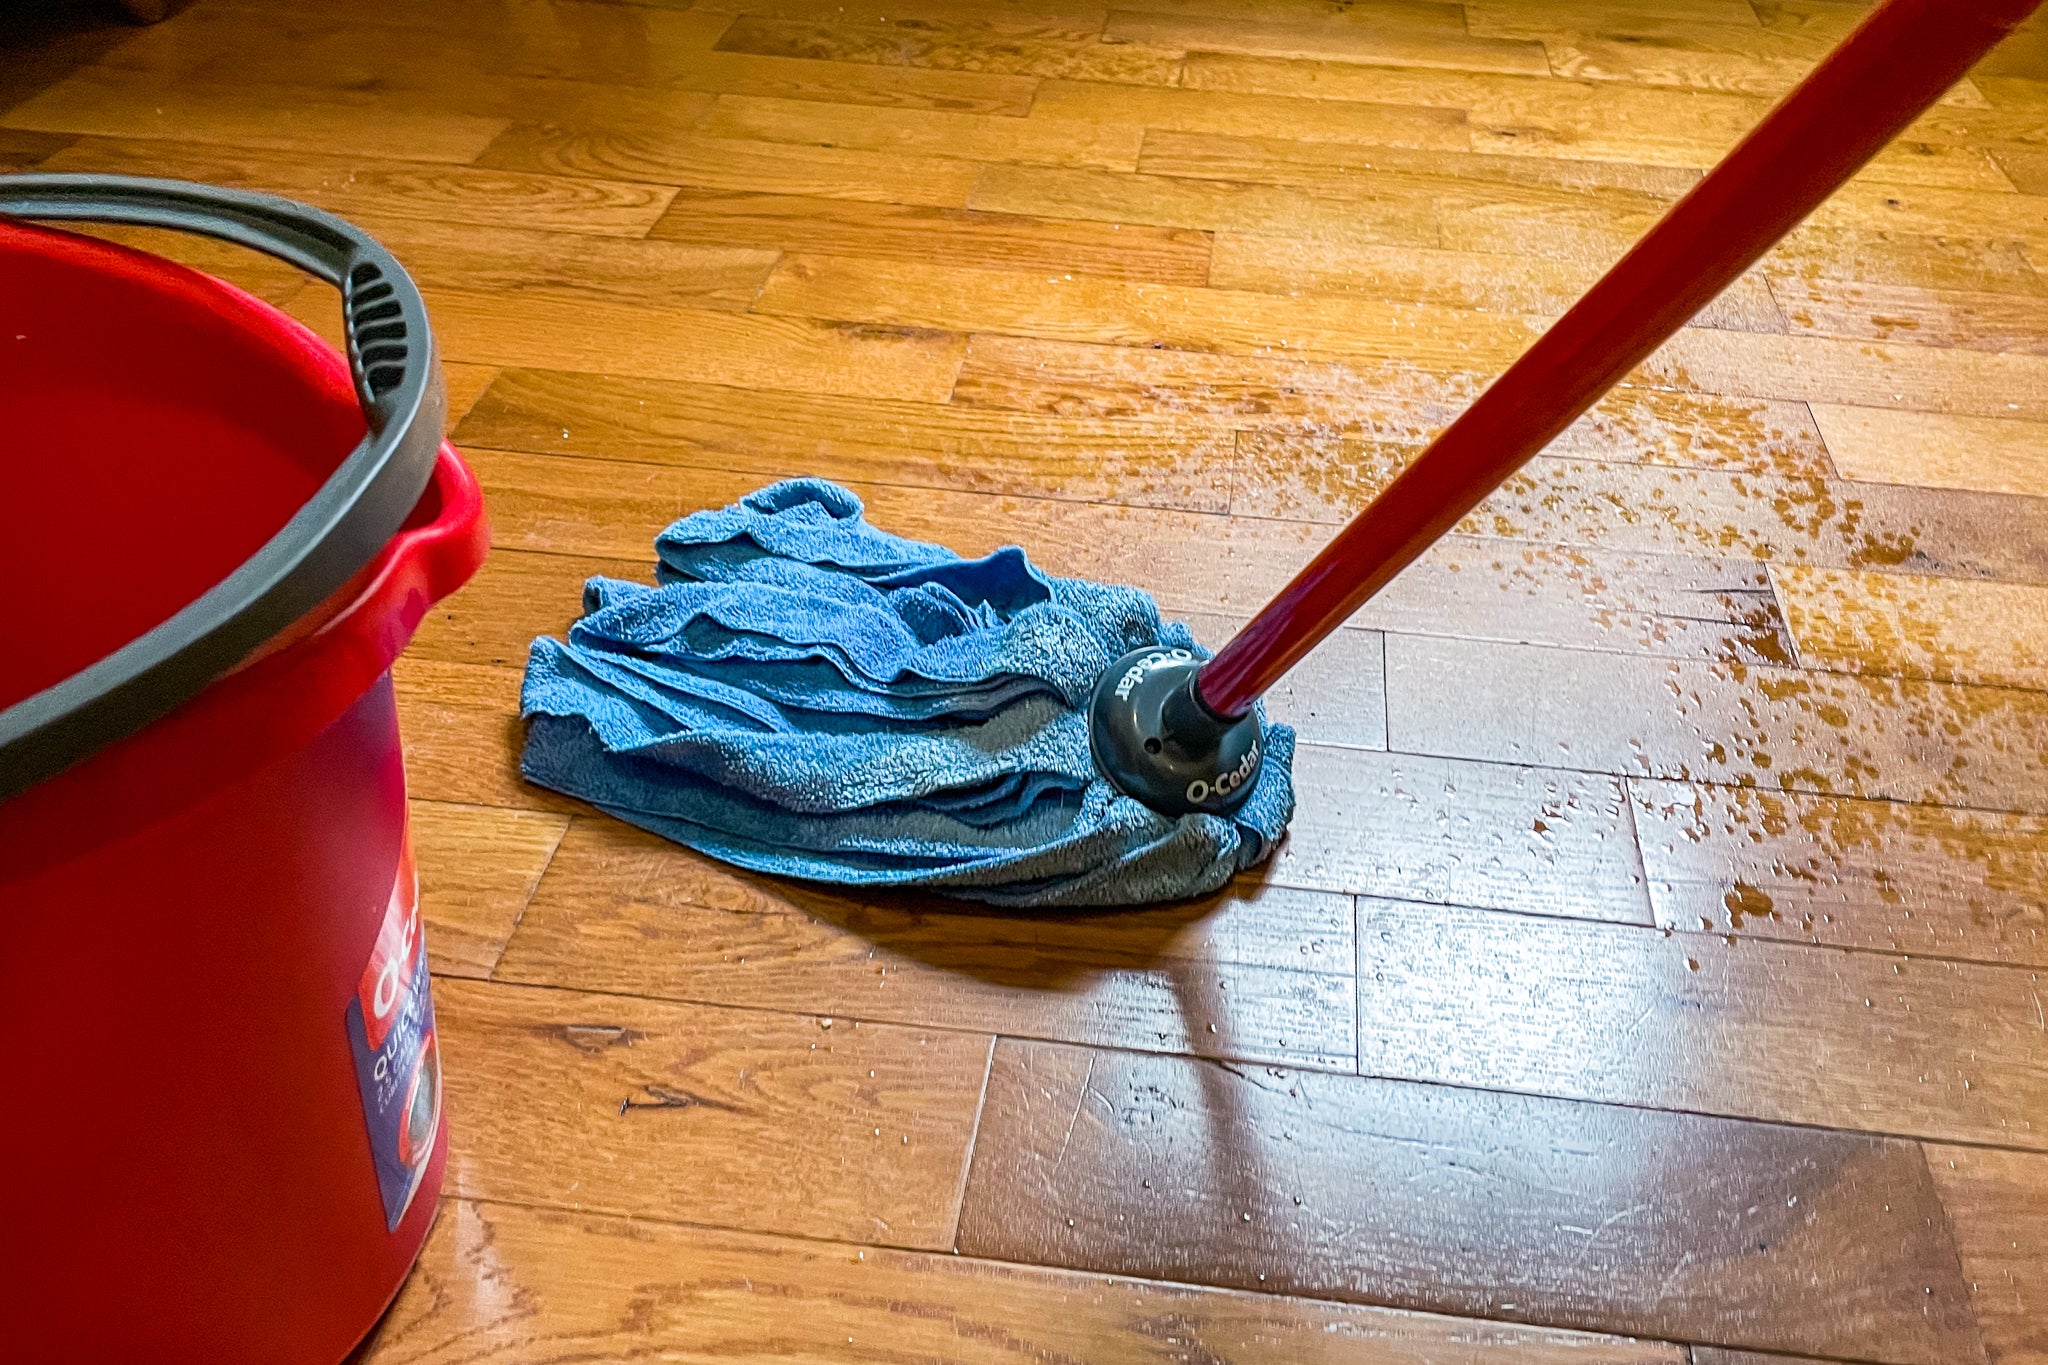 Tips To Polish A Floor Properly